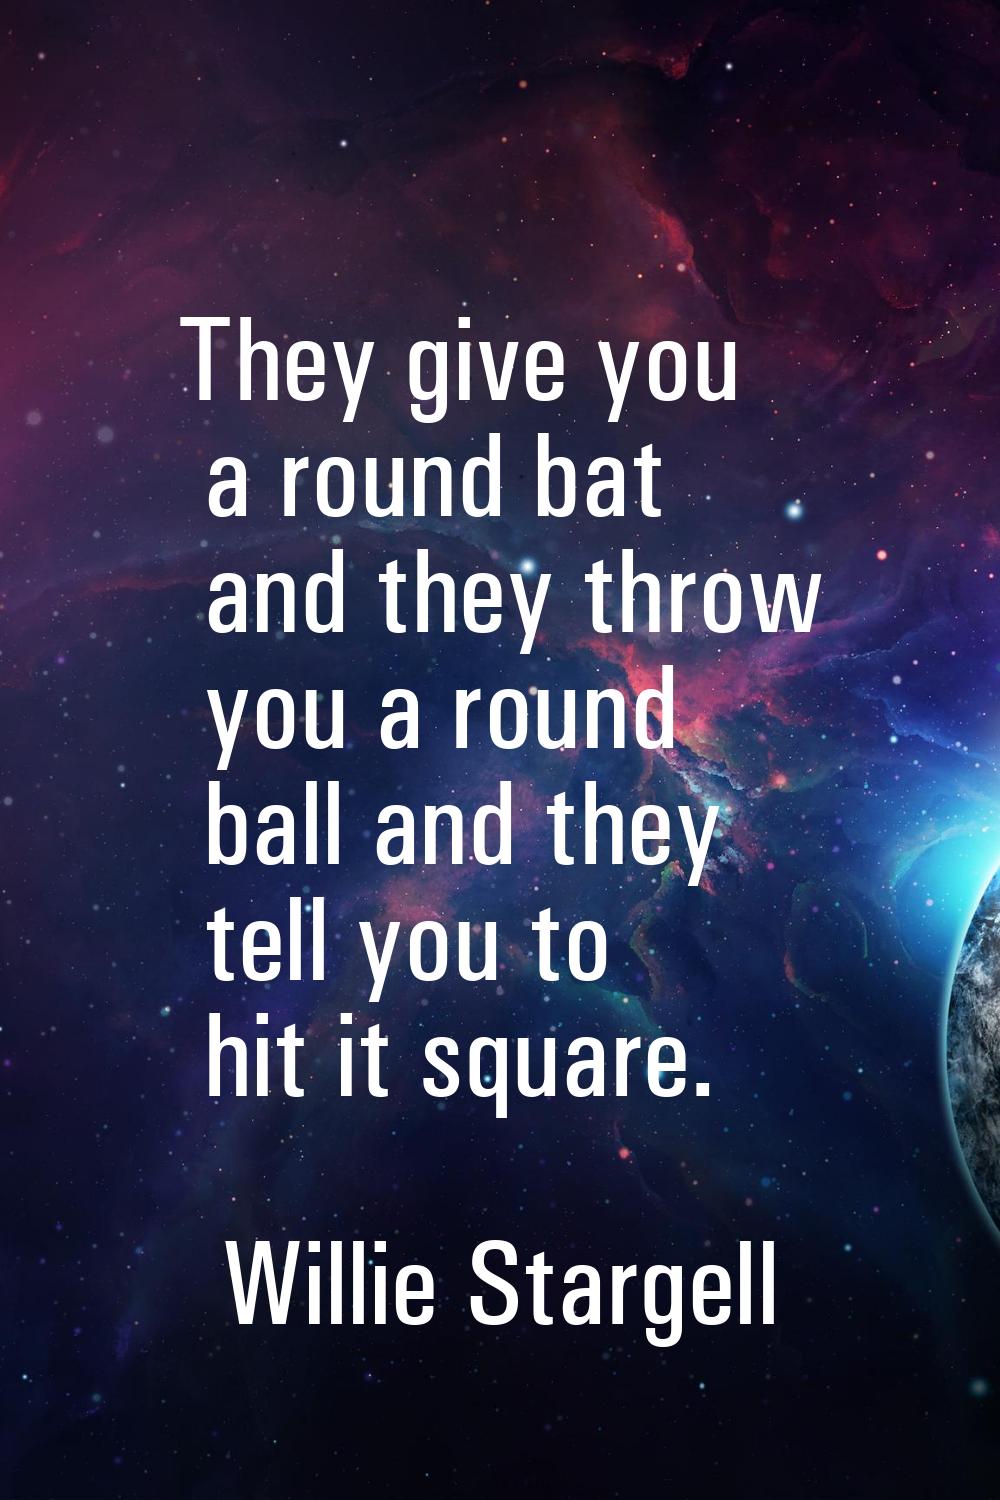 They give you a round bat and they throw you a round ball and they tell you to hit it square.